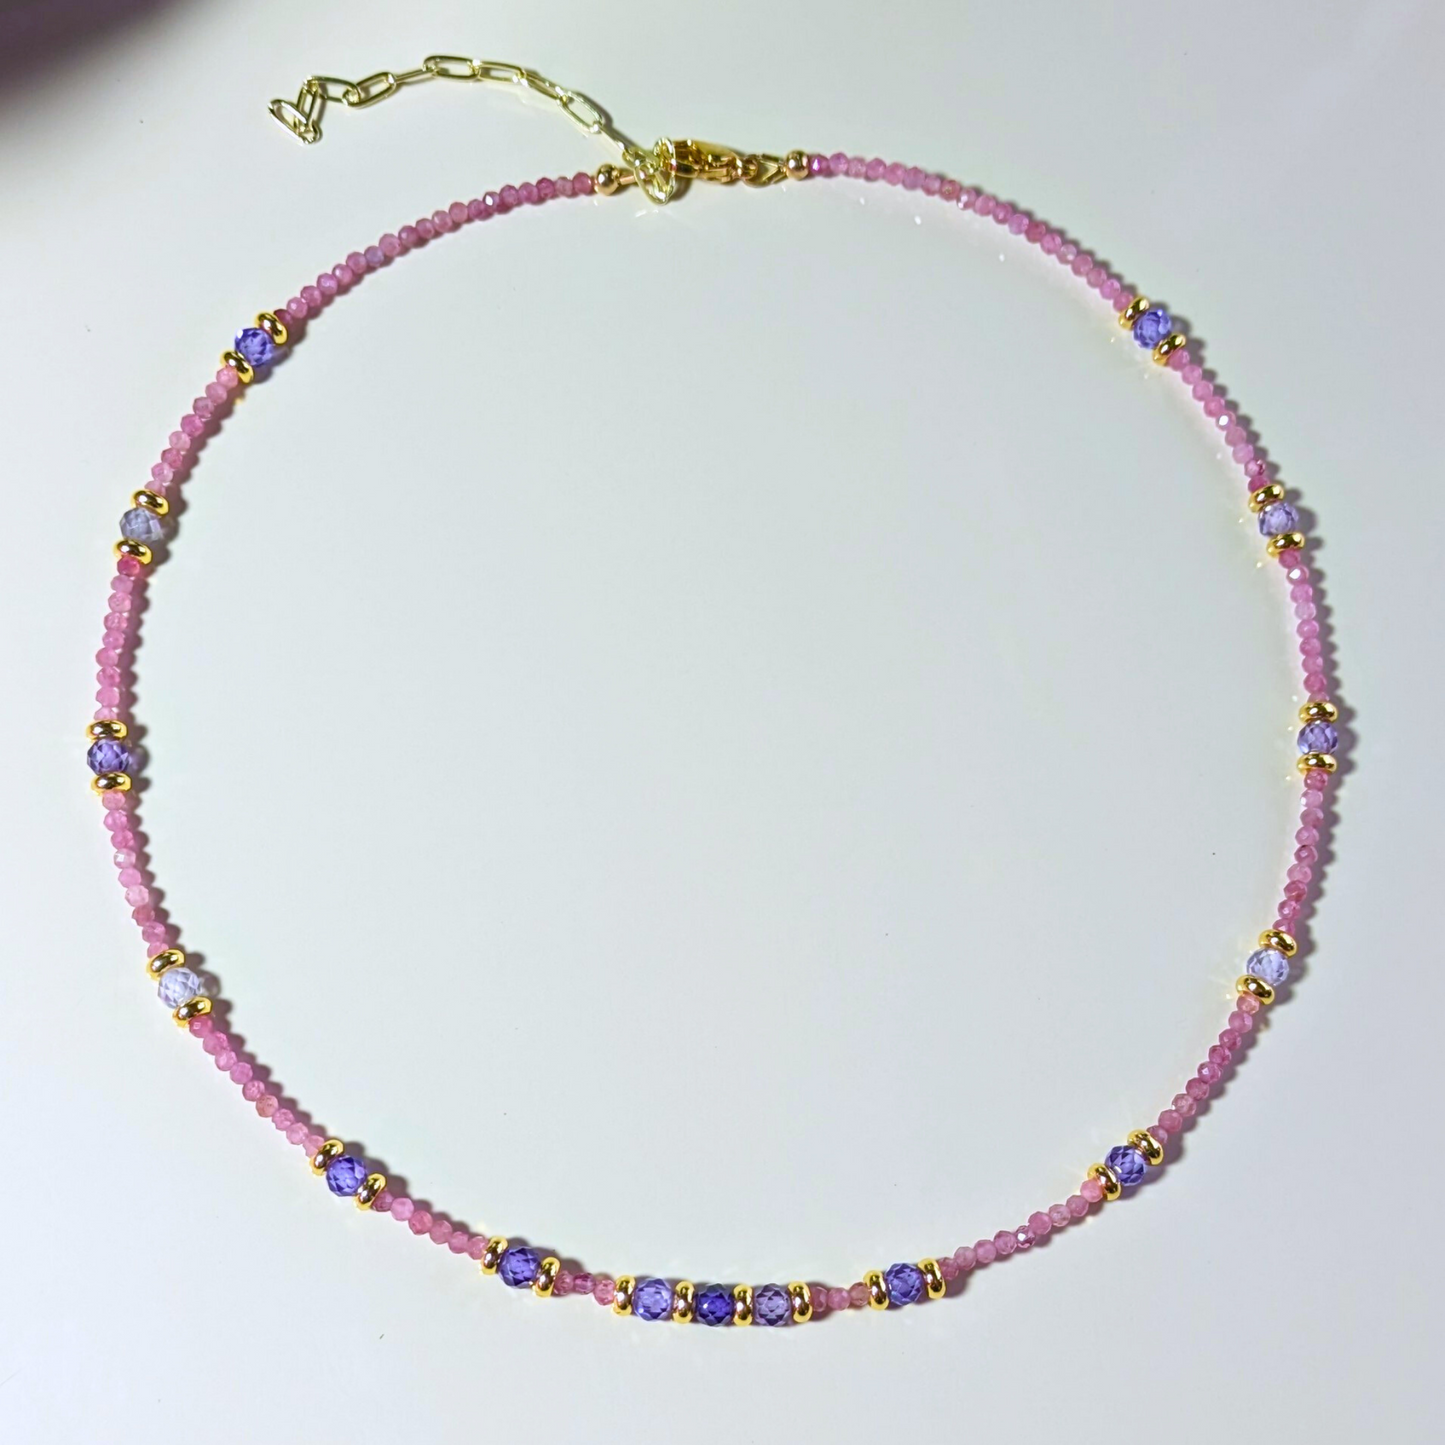 Ethereal Fusion: Faceted Rhodonite and Purple Zirconia Necklace with Stainless Steel Elegance